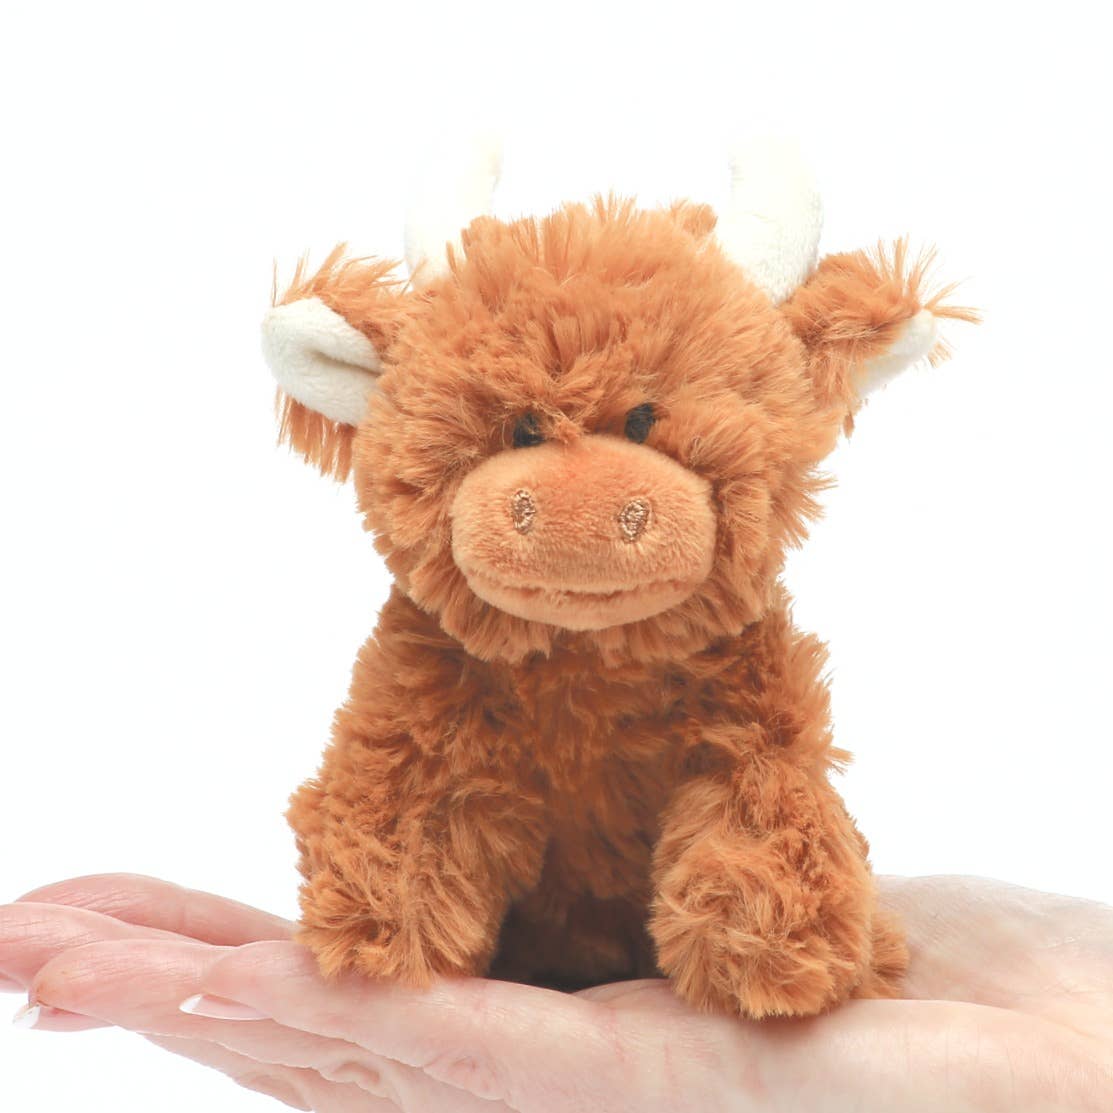 Highland Cow Stuffed Animals Cute Highland Cow Gnomes with Flowers